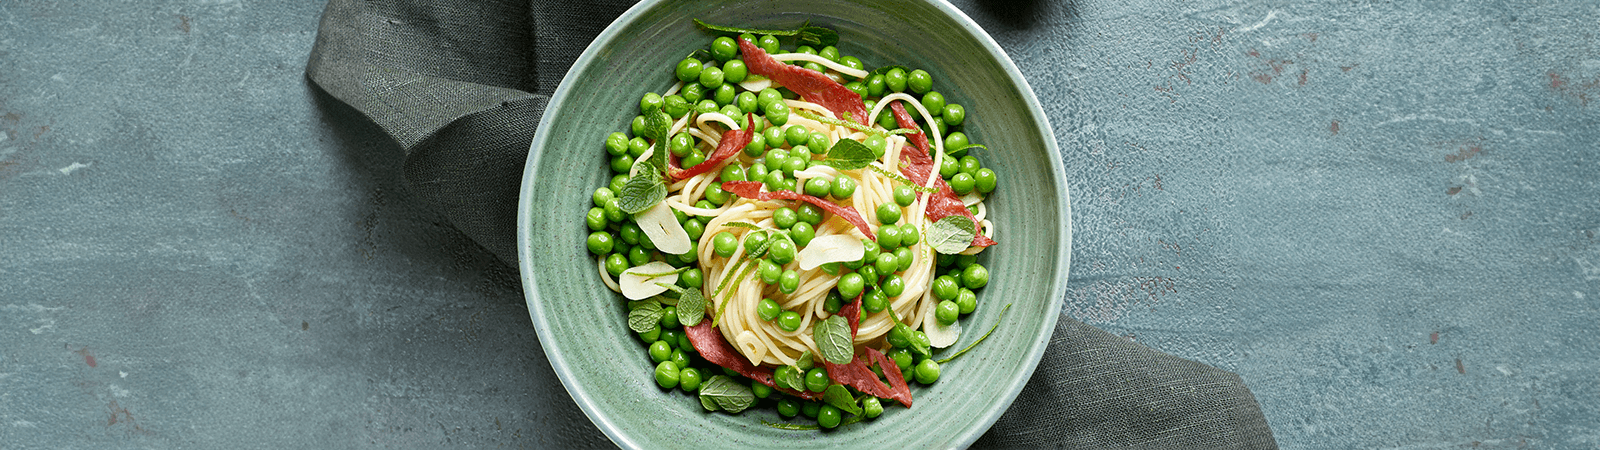 Pasta with Peas and Turkey Bacon - Emborg 